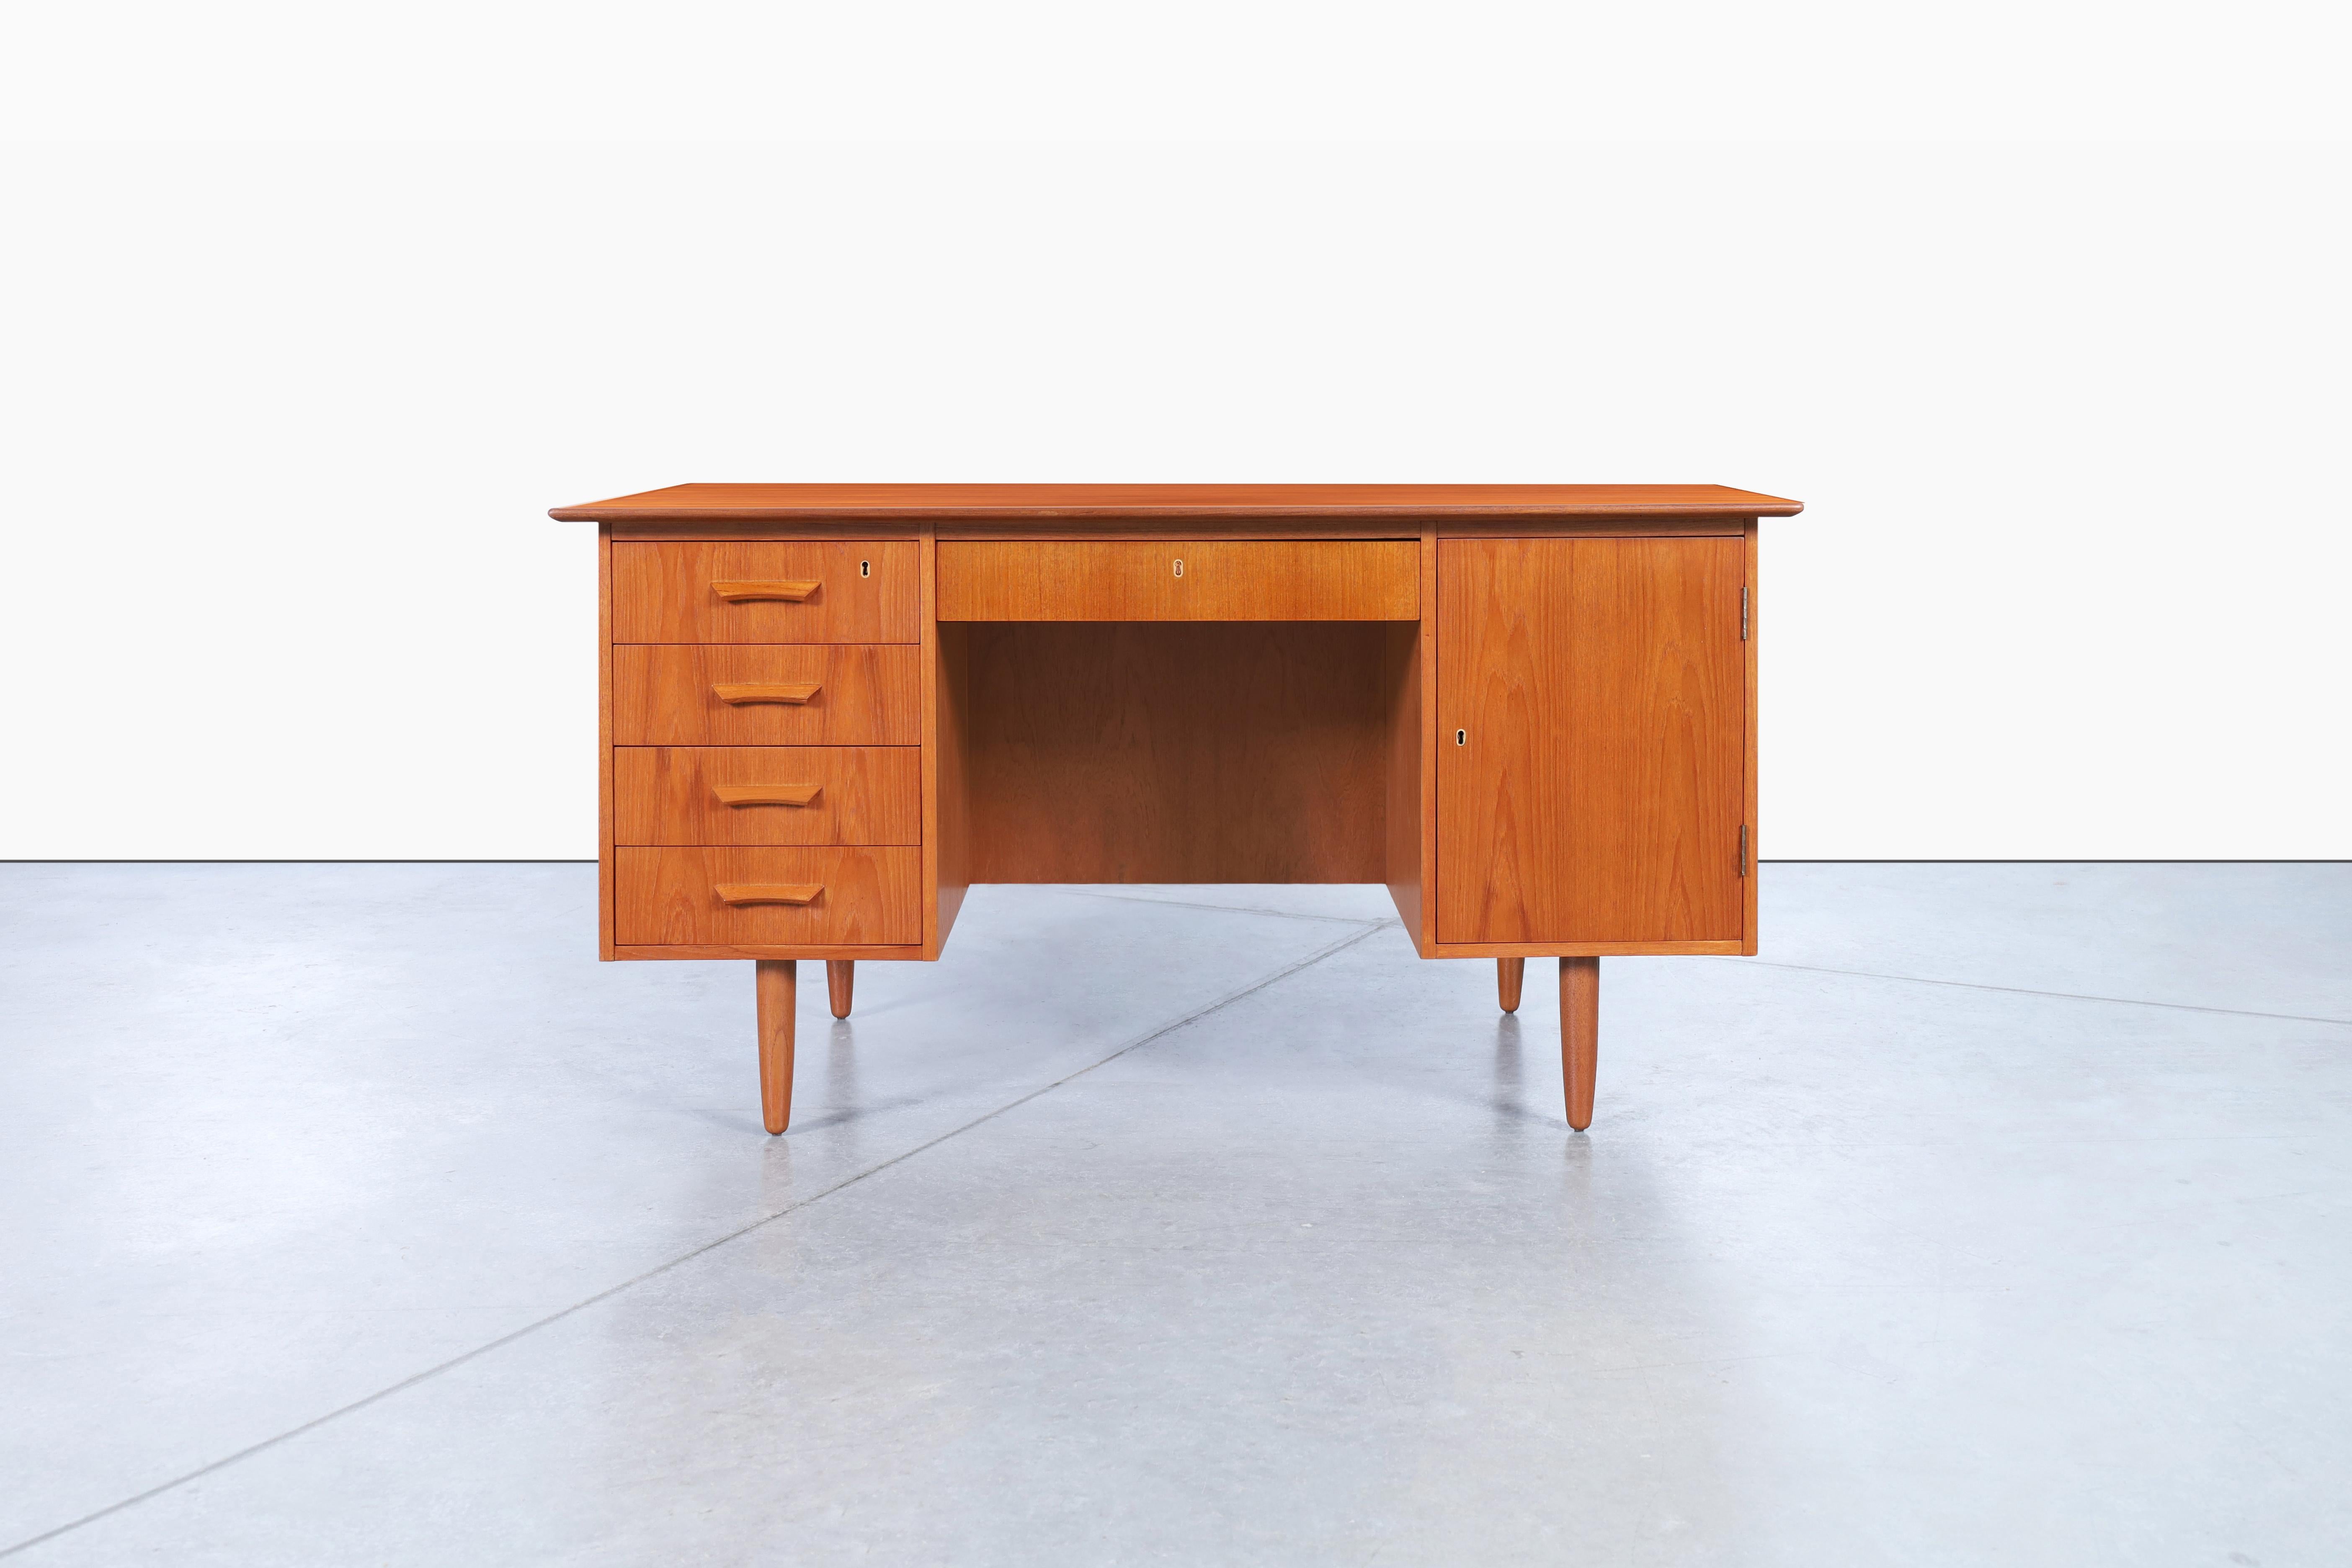 Stunning Danish modern teak desk designed in Denmark, circa 1960s. This desk features four dovetail drawers and a generous compartment, providing ample storage for all your essentials. Each drawer and the handcrafted handles add a personal touch of